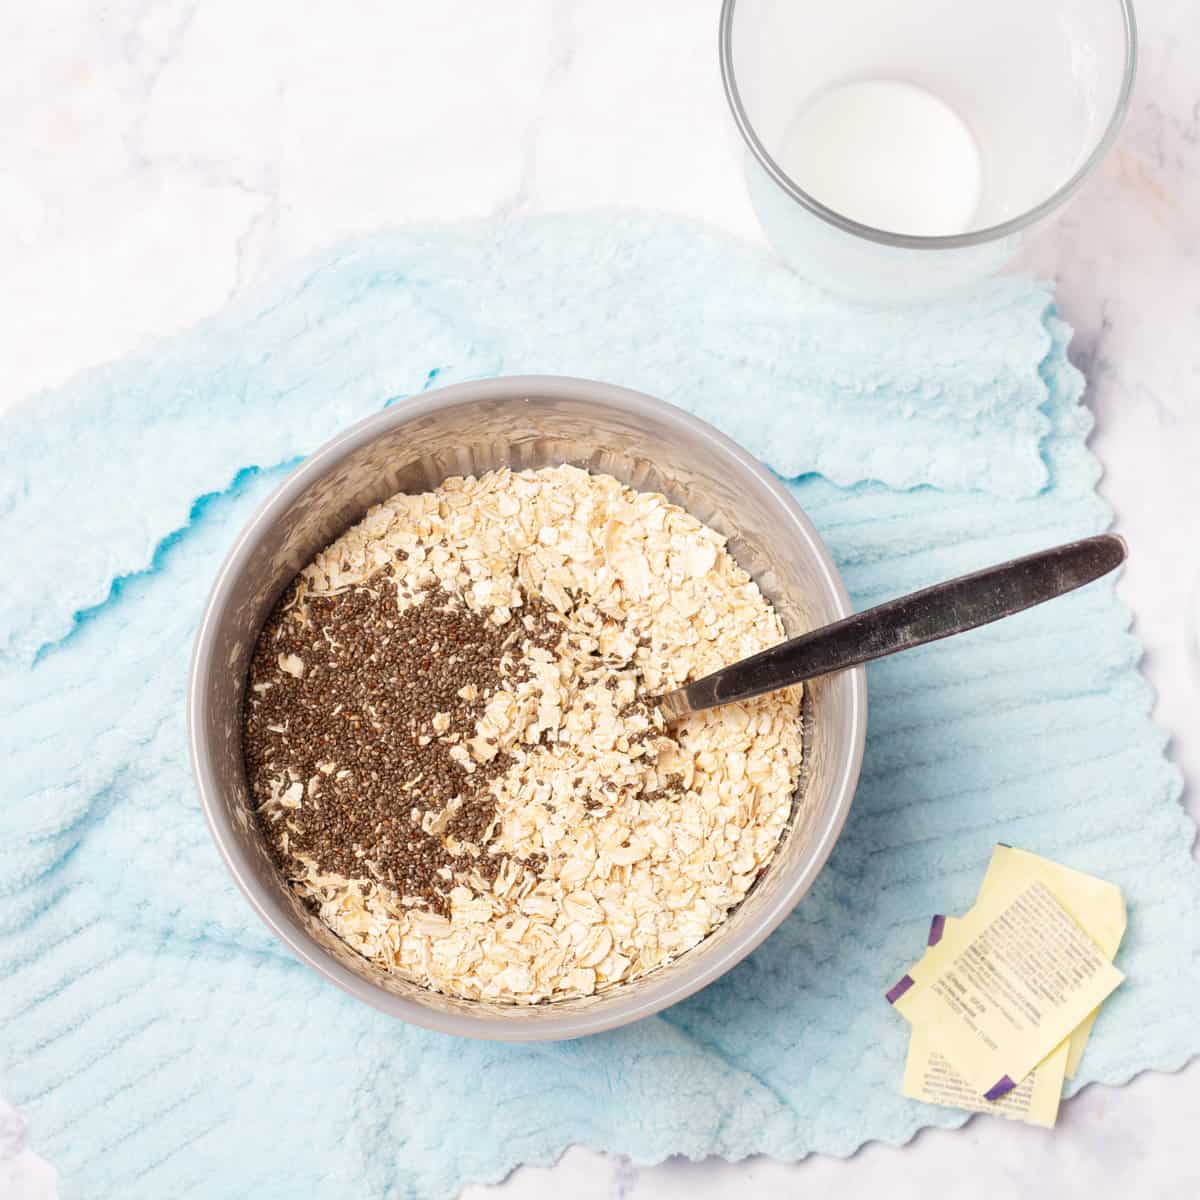 Combine the oats and chia seeds and mix well. 